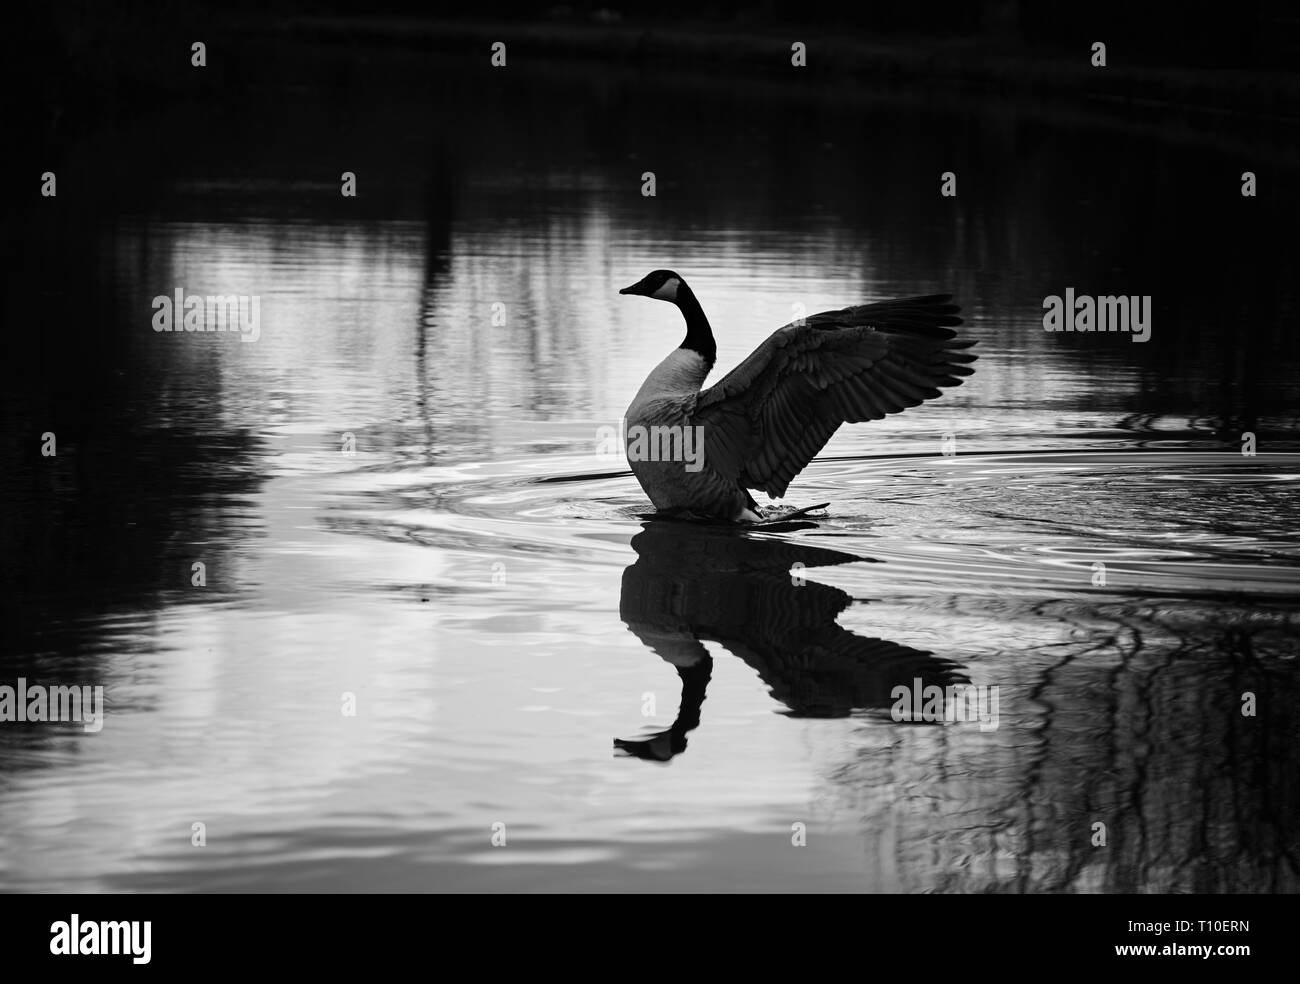 A canada goose flapping its wings on the Macclesfield canal, placed in a small area of light with shadow around. Stock Photo